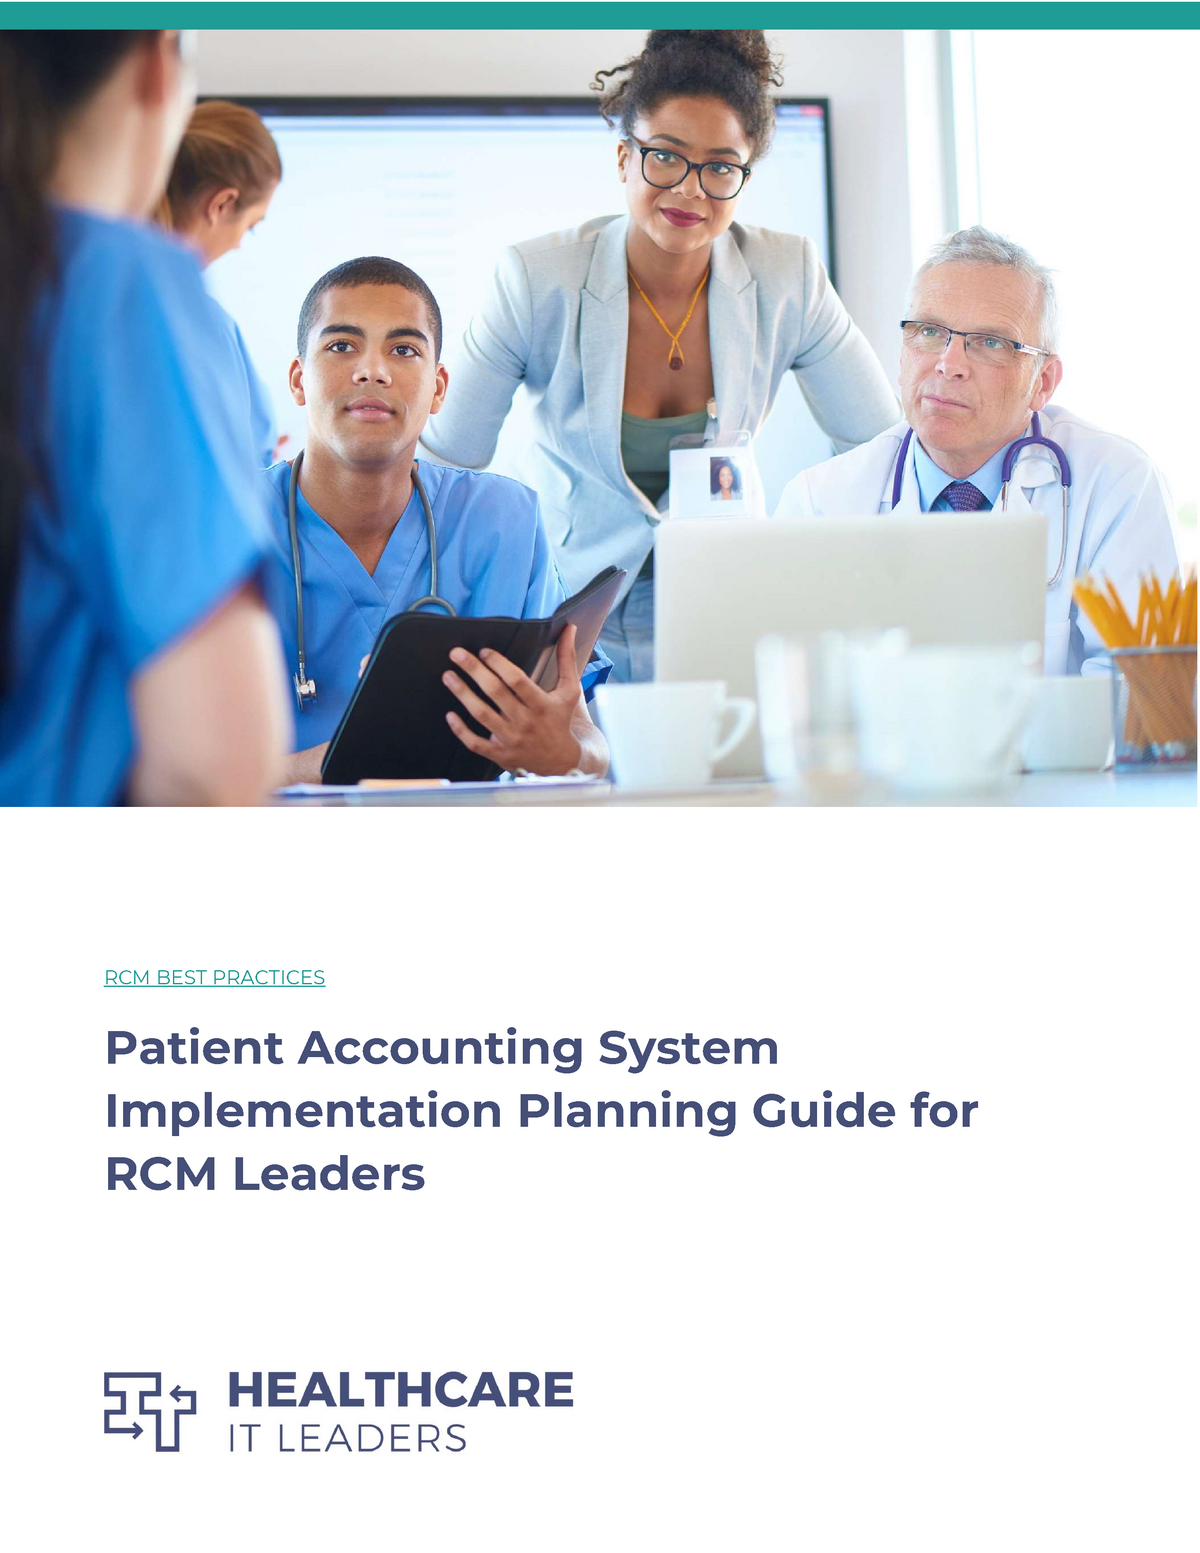 Patient Accounting System Implementation Guide 2021 Marketing